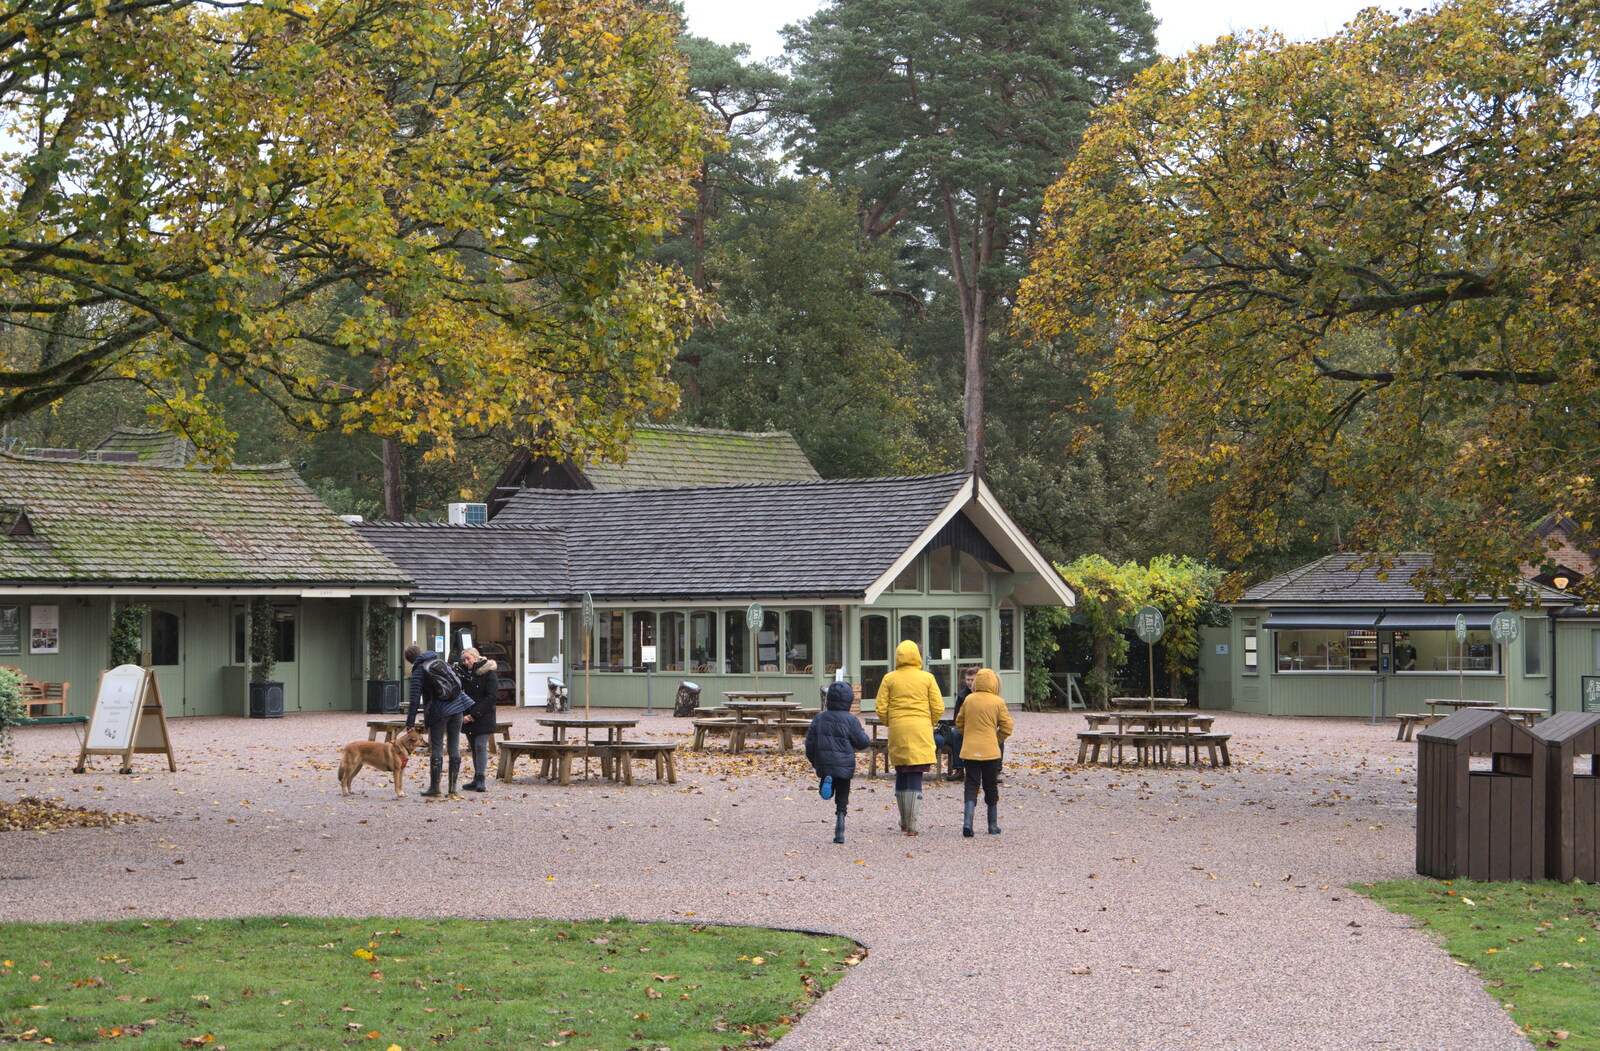 The gang wanders off to the café and shops from A Trip to Sandringham Estate, Norfolk - 31st October 2020